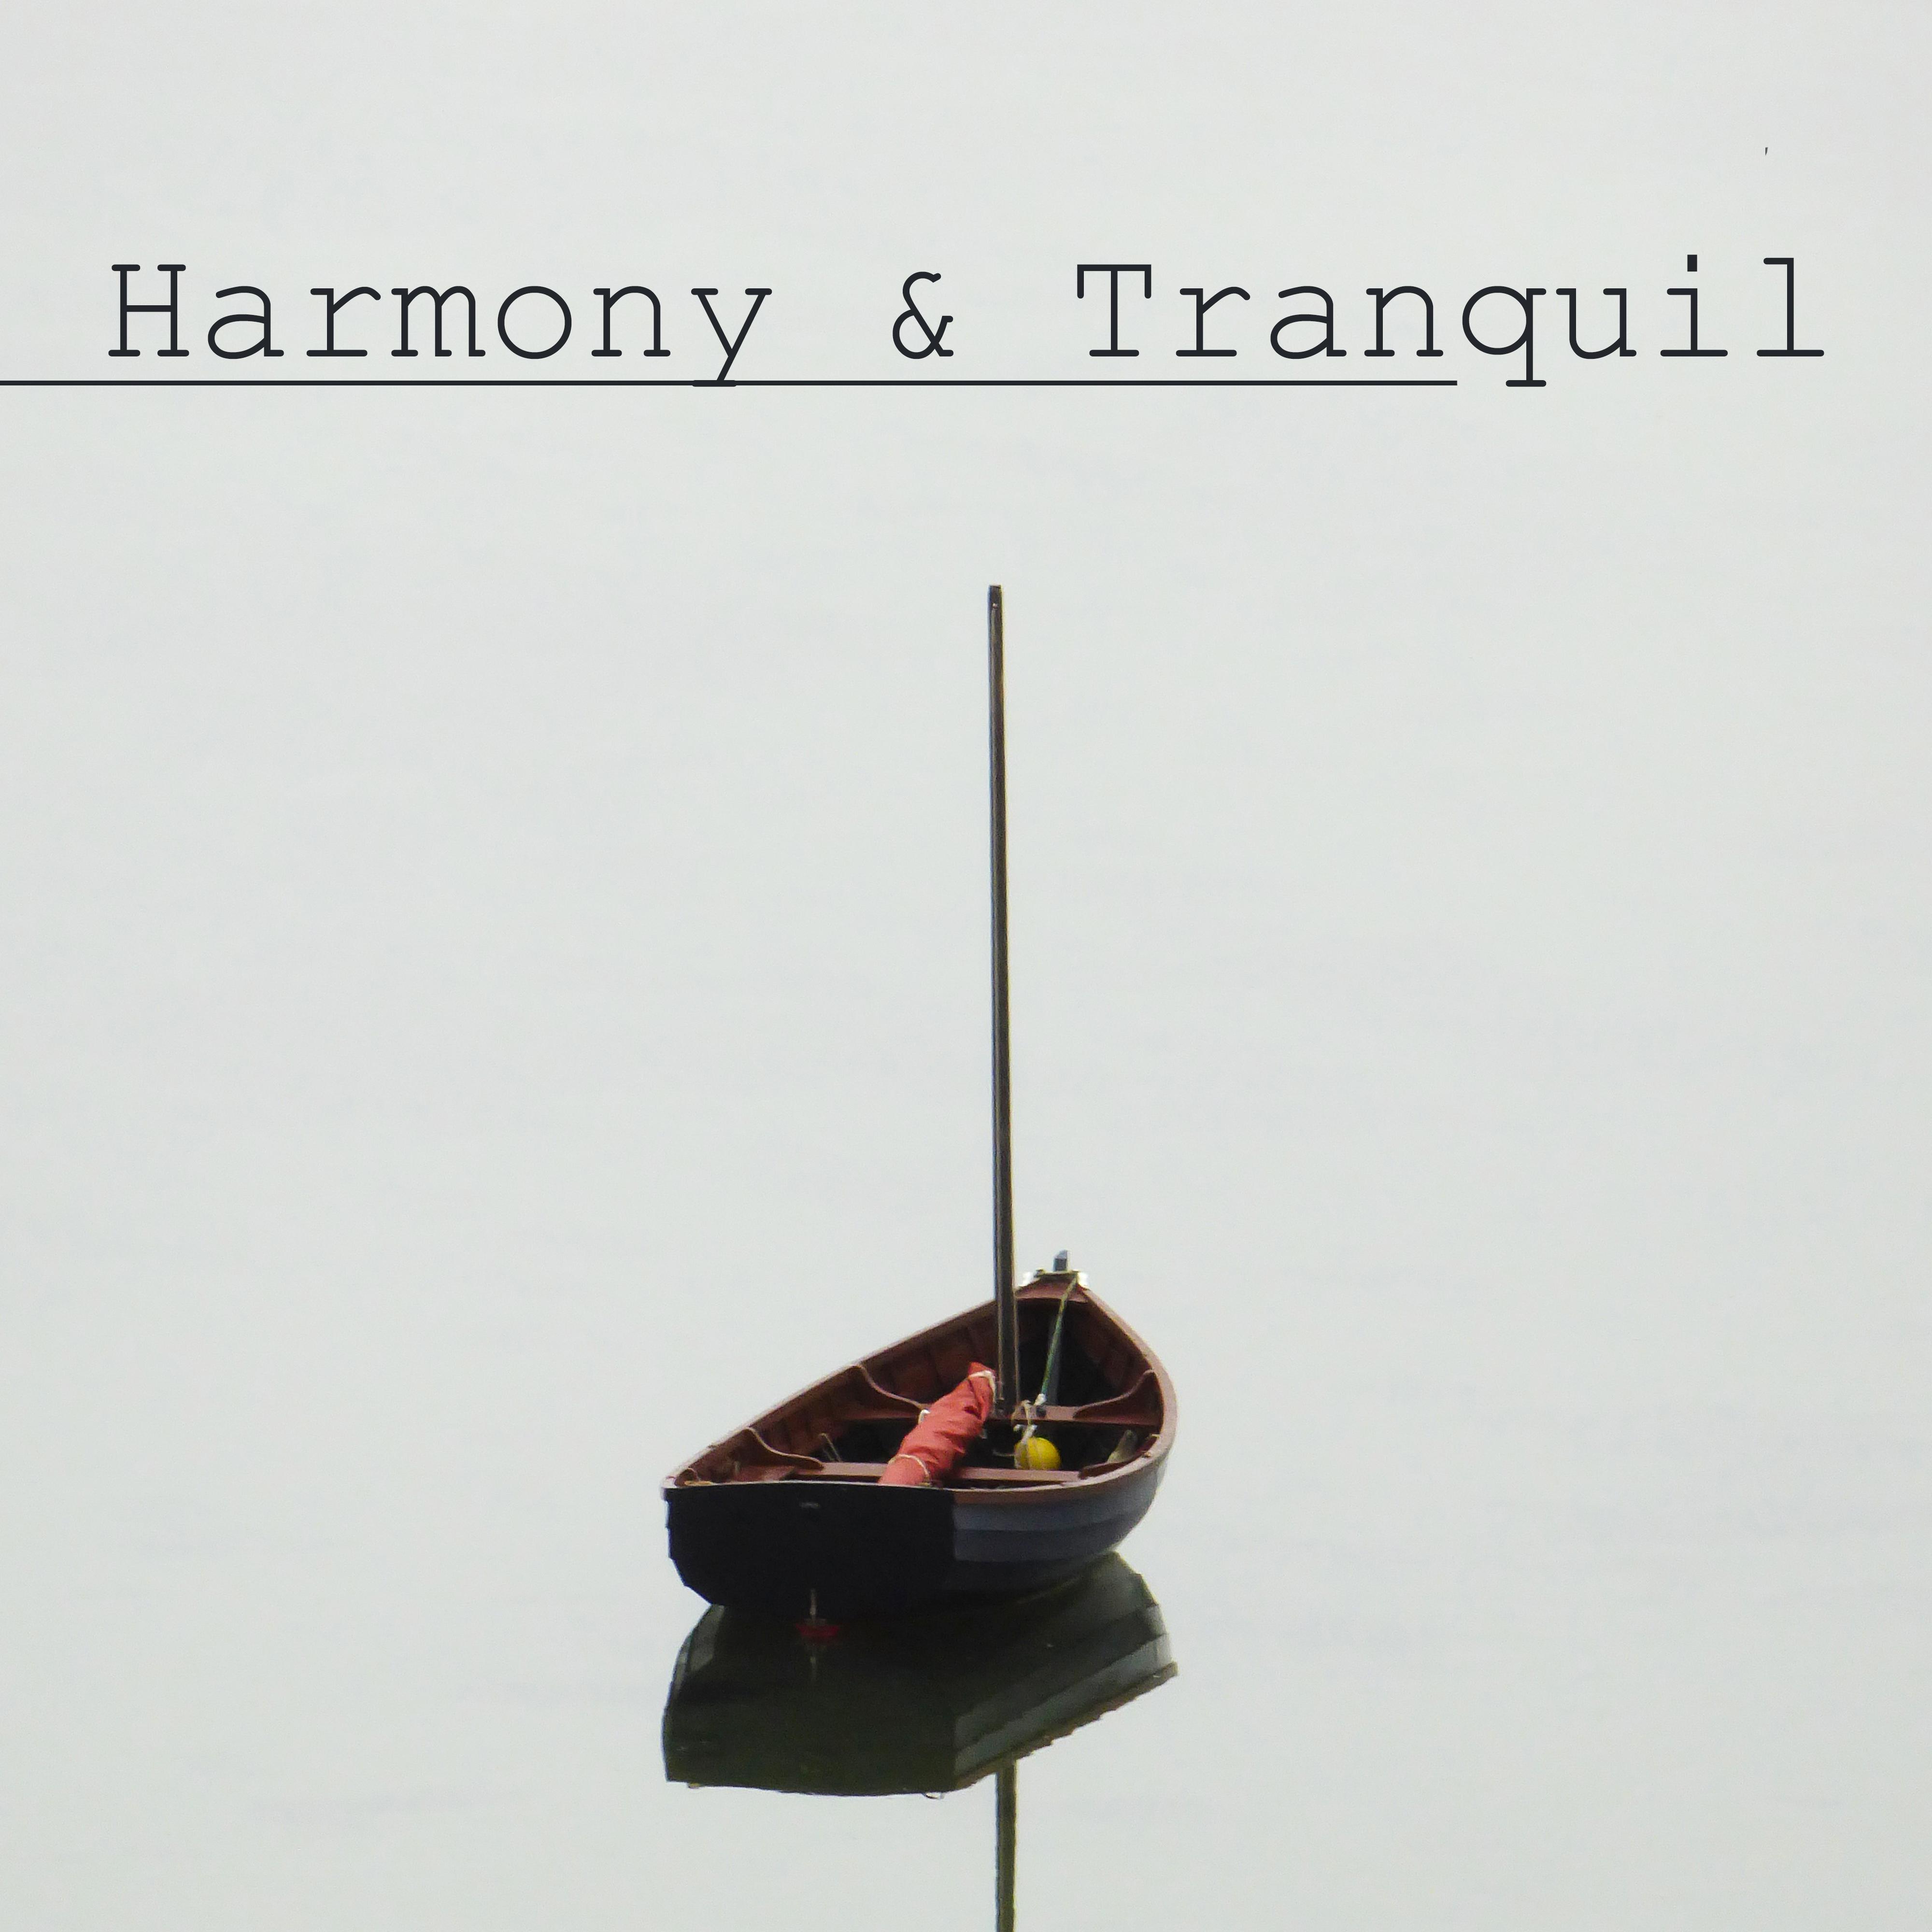 Harmony  Tranquil  Good Mood, Contemplation of Nature, Stress Relief, Calming Melodies, Pure Relaxation, Peaceful Mind, Soft Nature Sounds for Healing